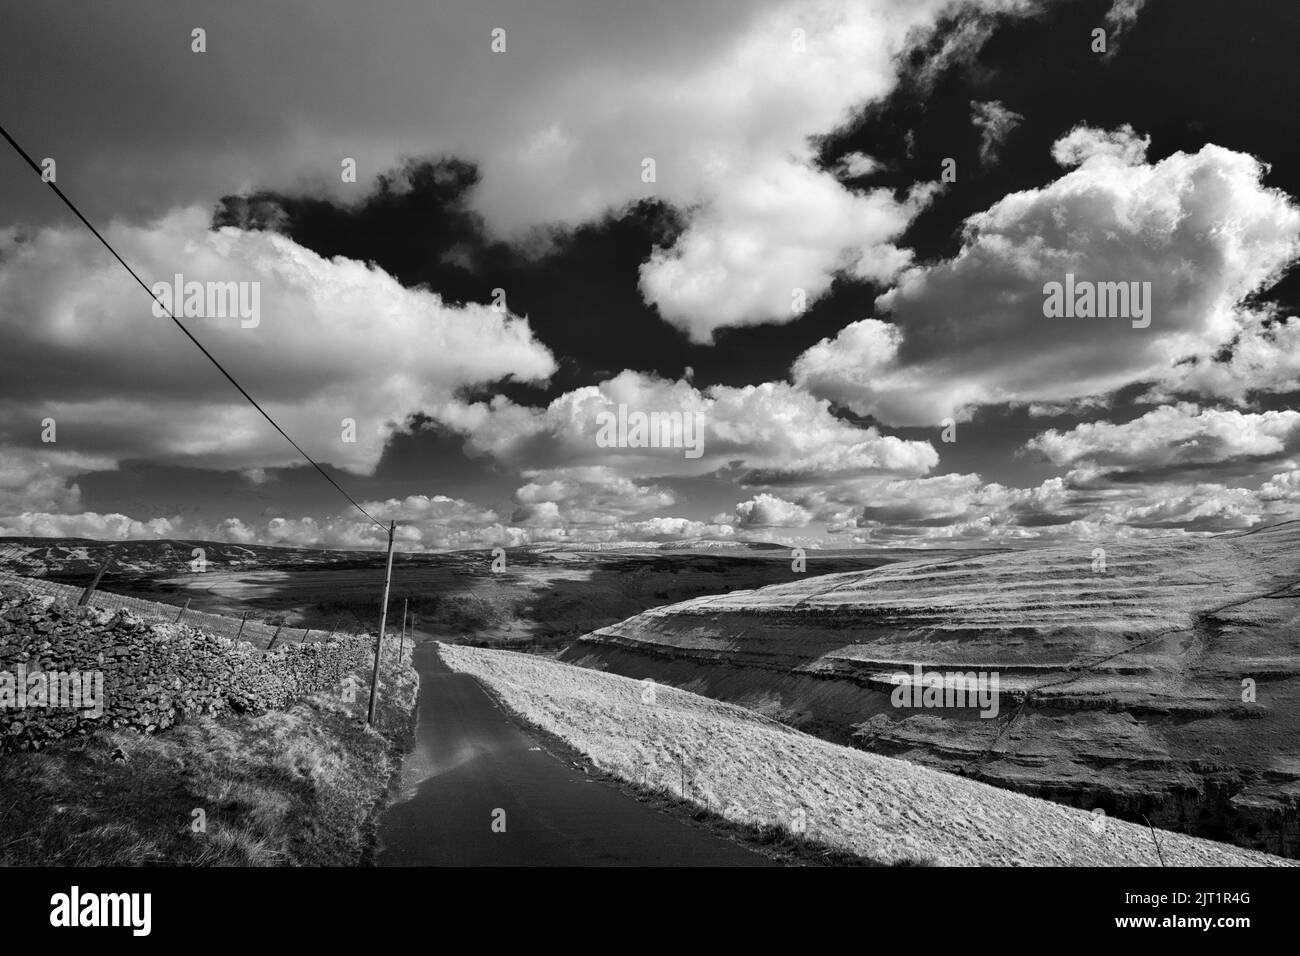 Stunning monochrome view entering Littondale on Brootes Lane, Yorkshire Dales National Park, North Yorkshire, England, UK landscapes Stock Photo